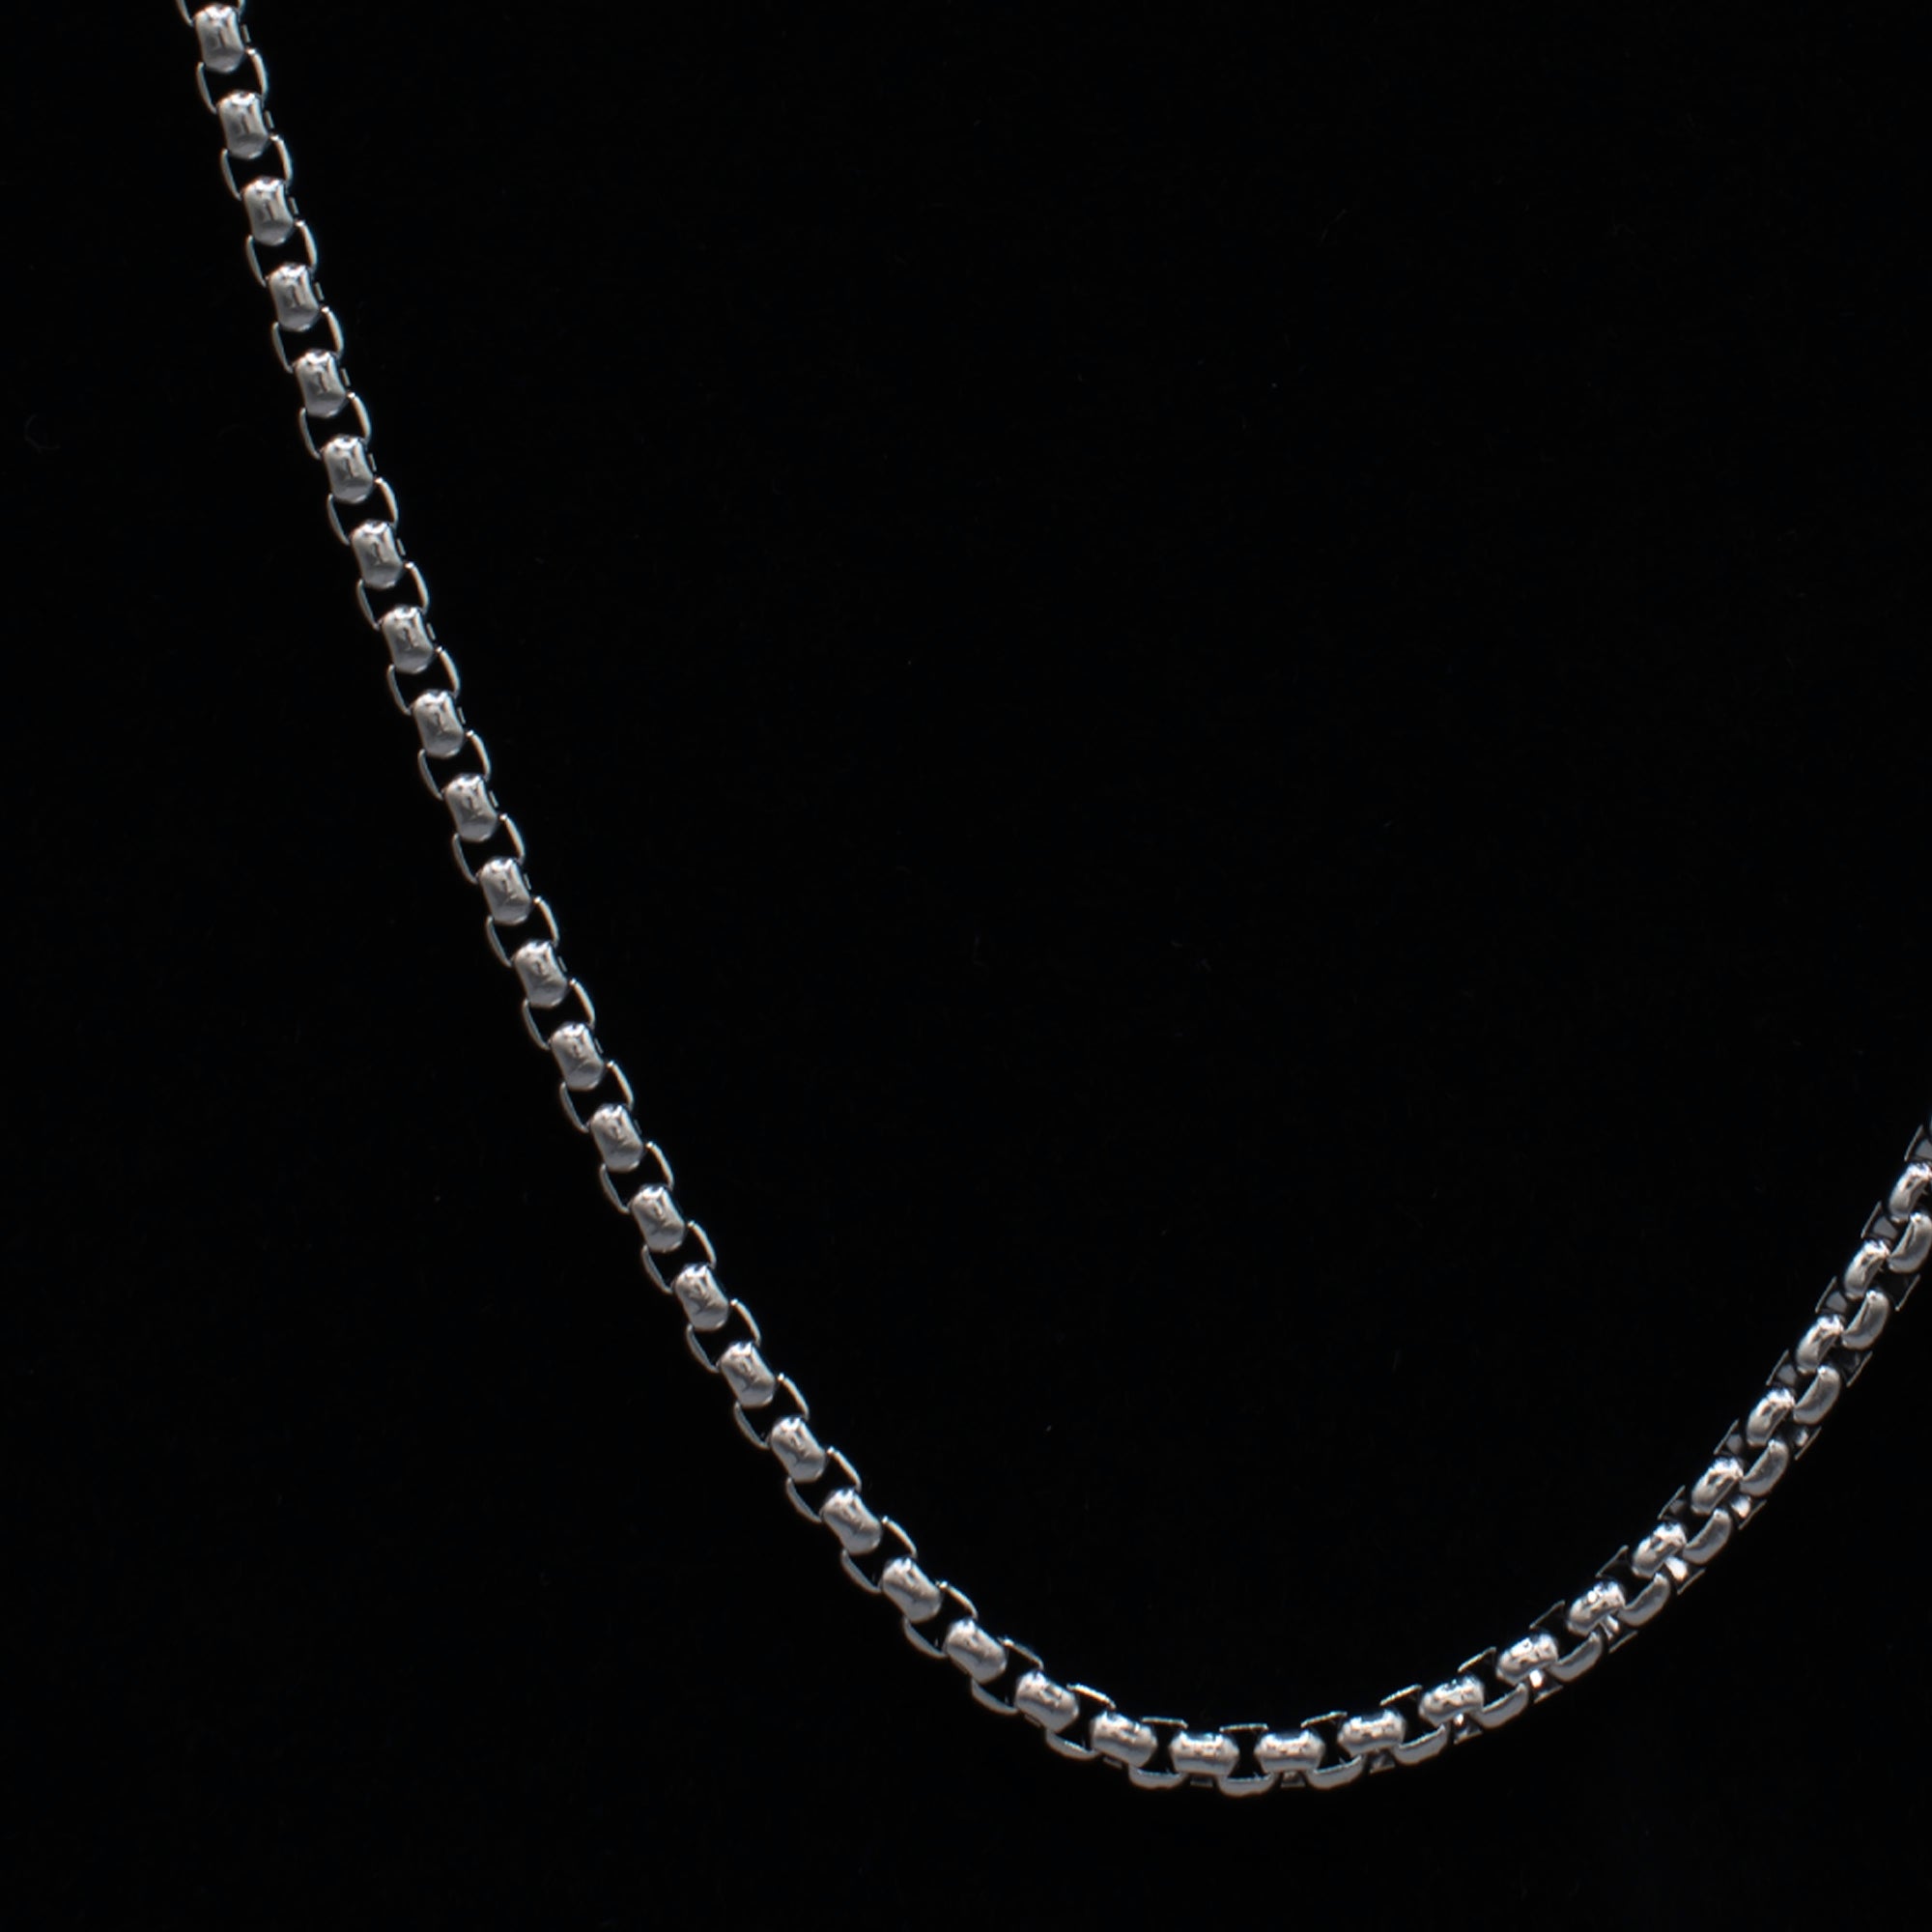 Silver Round Box Chain Necklace - 4mm